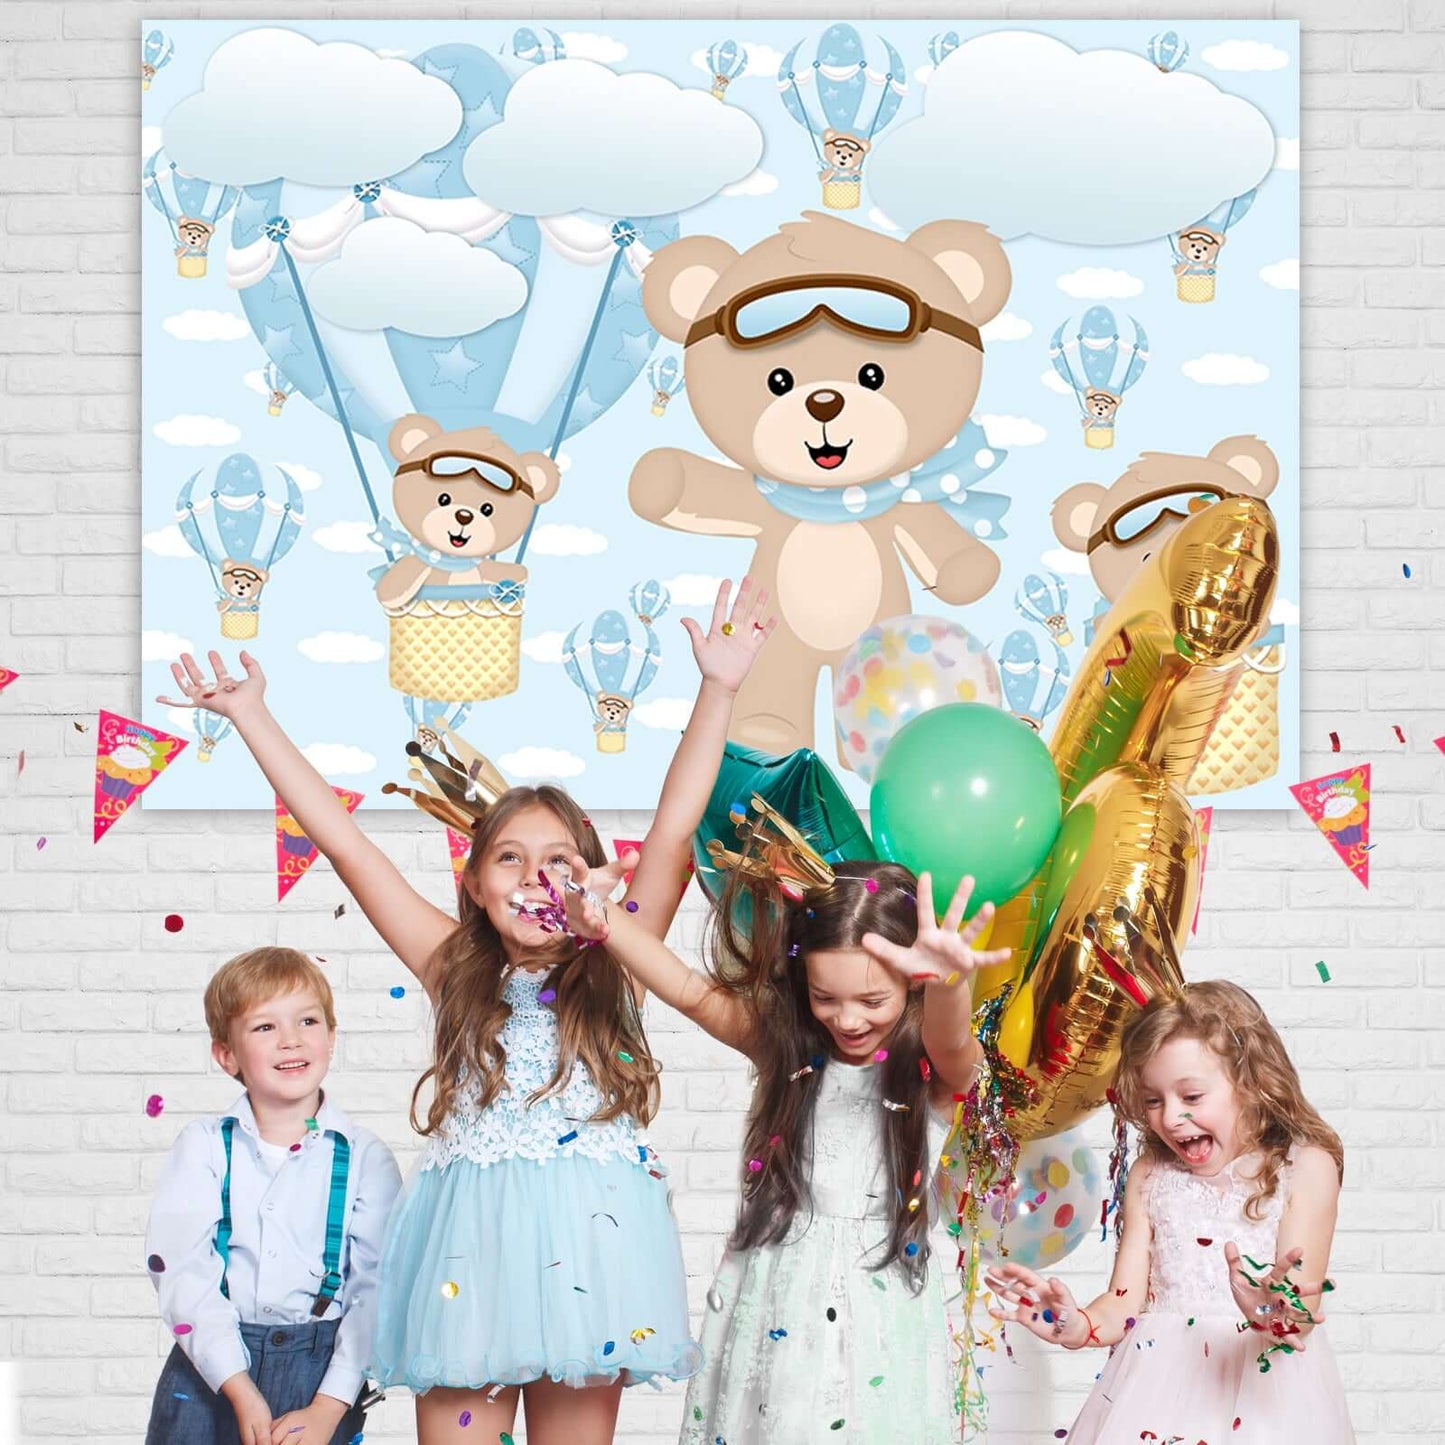 Hot Air Balloons White Clouds Newborn Baby Shower Bear Boy Birthday Backdrop Vinyl Photography Background For Photo Studio